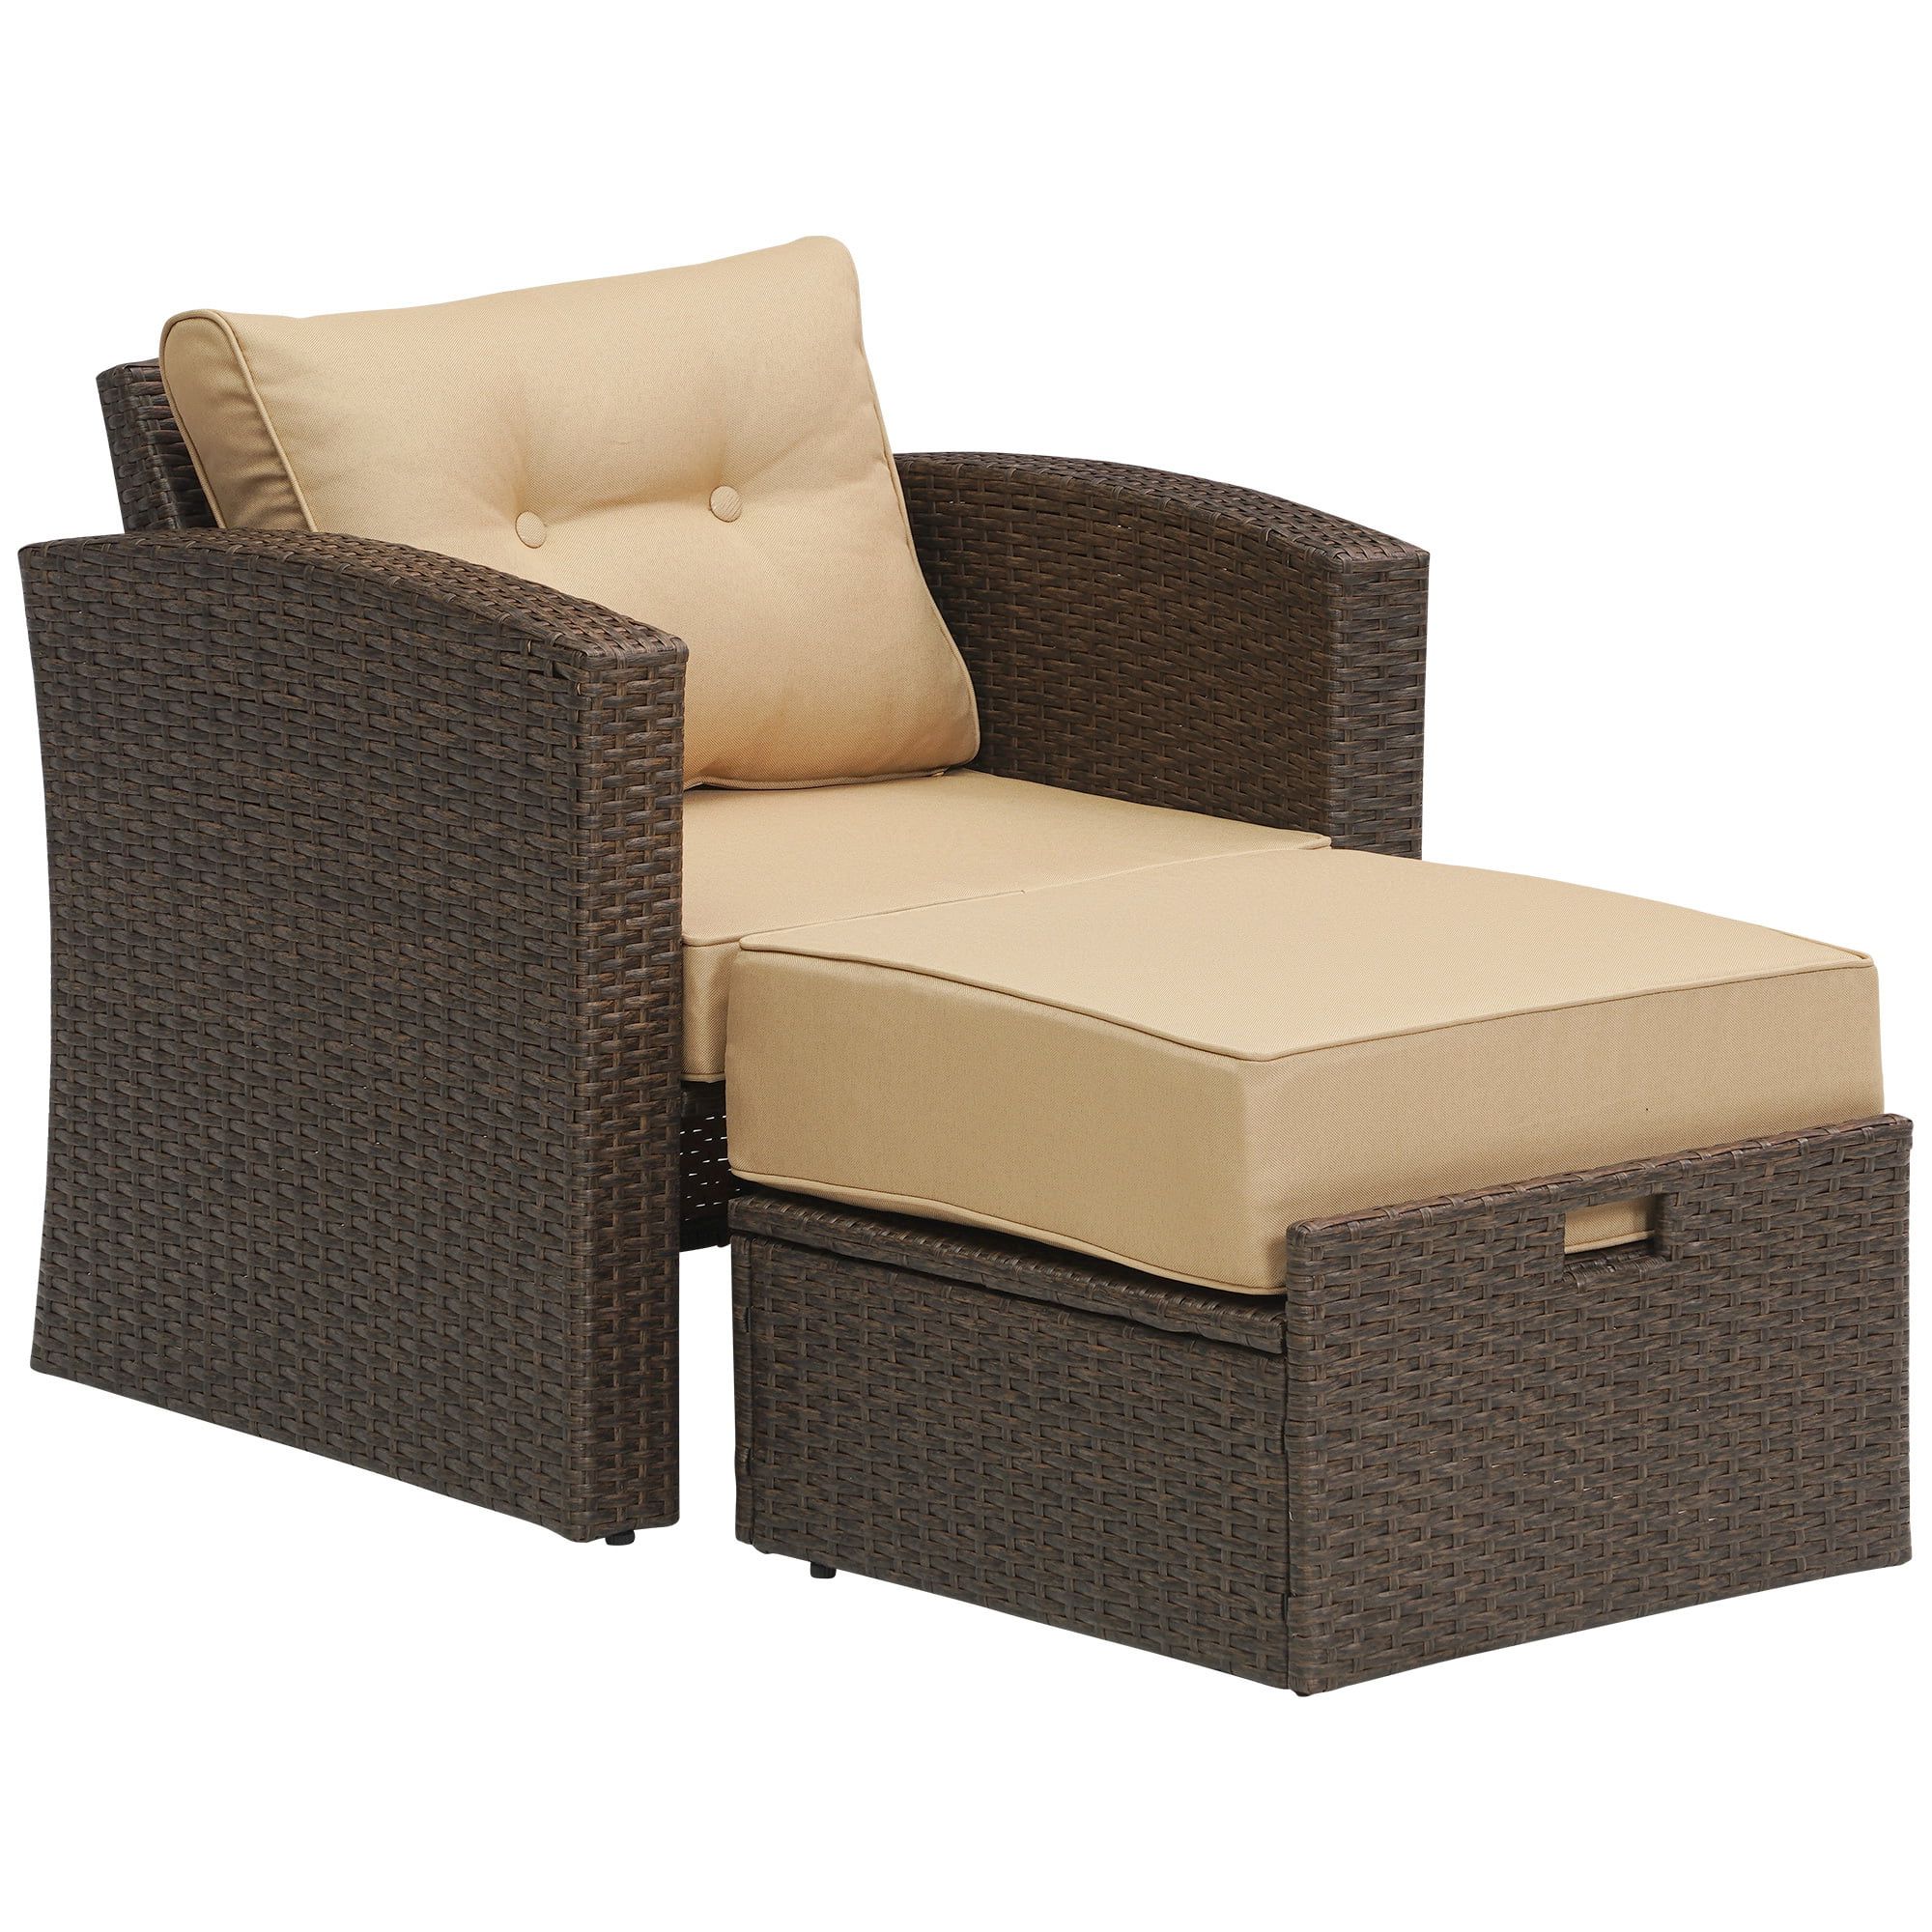 Outdoor Wicker Furniture Single Chair With Ottoman,brown Rattan Outdoor  Armchair Sofa Set With Beige Cushions,aluminum Frame – Walmart Within Most Up To Date Brown Wicker Chairs With Ottoman (Photo 9 of 15)